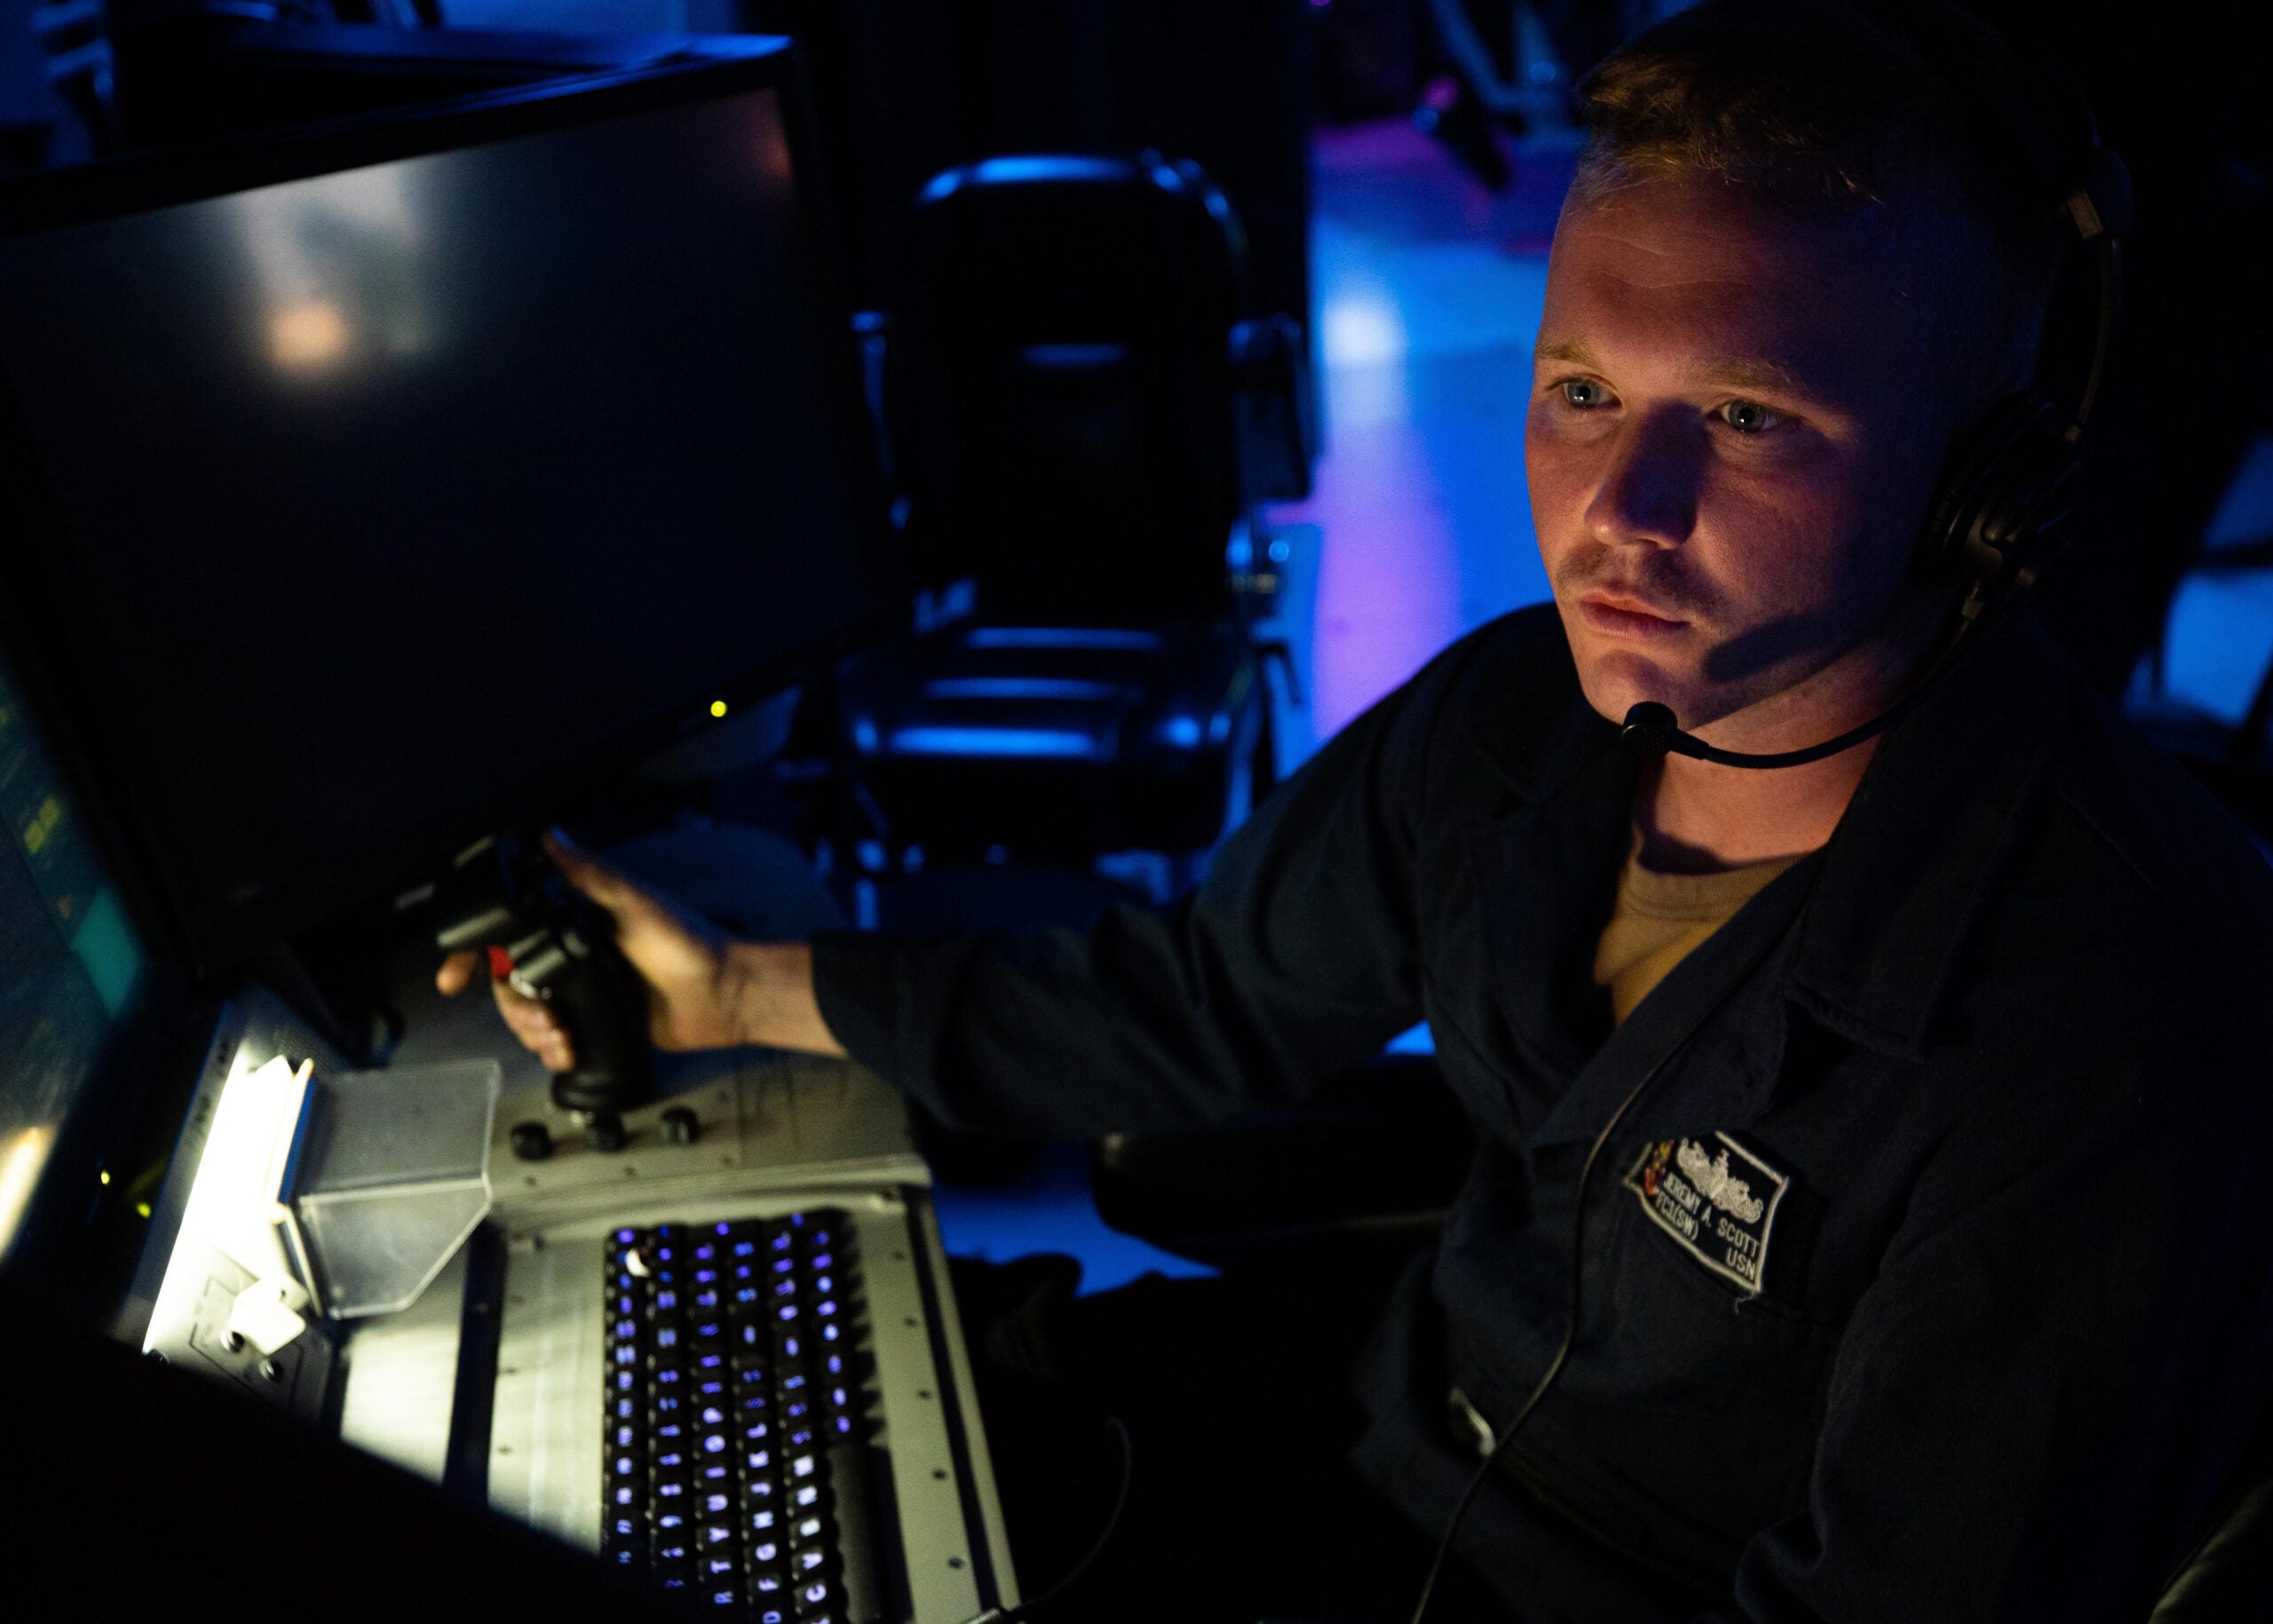 PHILIPPINE SEA (Oct. 3, 2022) Fire Controlman 1st Class Jeremy Scott, from Vero Beach, Fla., stands watch aboard the Ticonderoga-class guided-missile cruiser USS Chancellorsville (CG 62) in the Philippine Sea, Oct. 3, 2022. (U.S. Navy photo by Petty Officer 2nd Class Justin Stack)